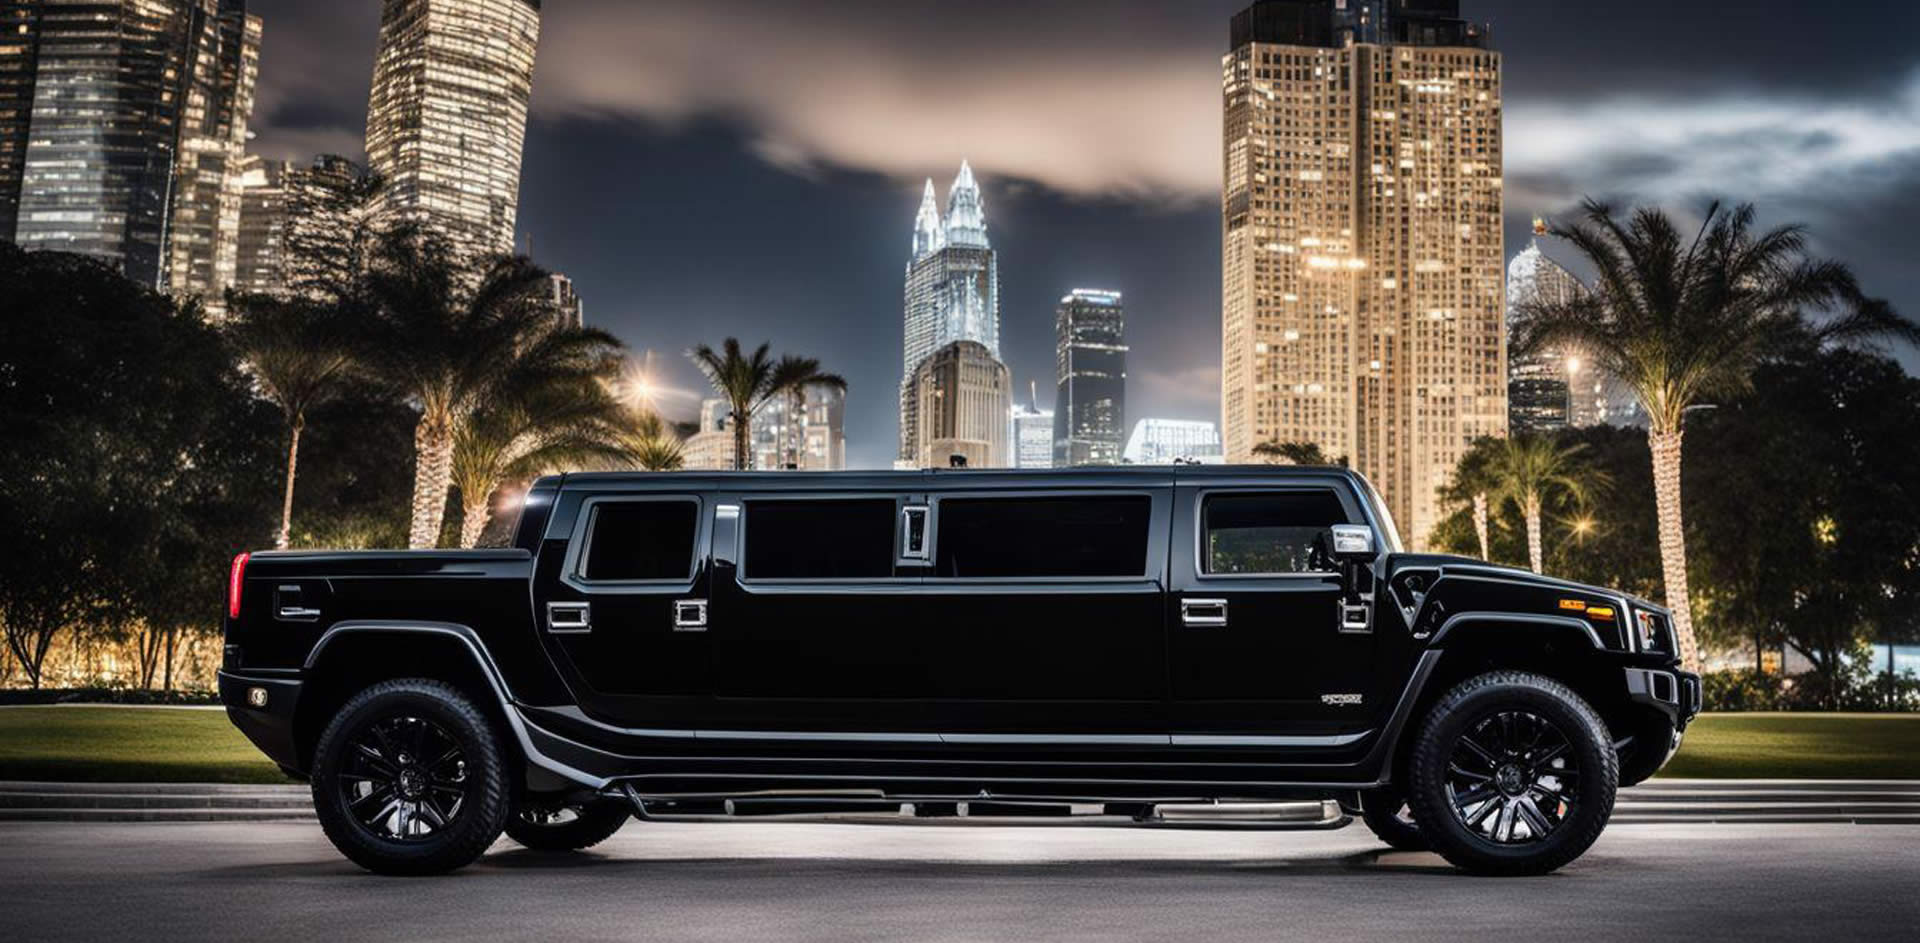 A black limousine parked in front of a city skyline